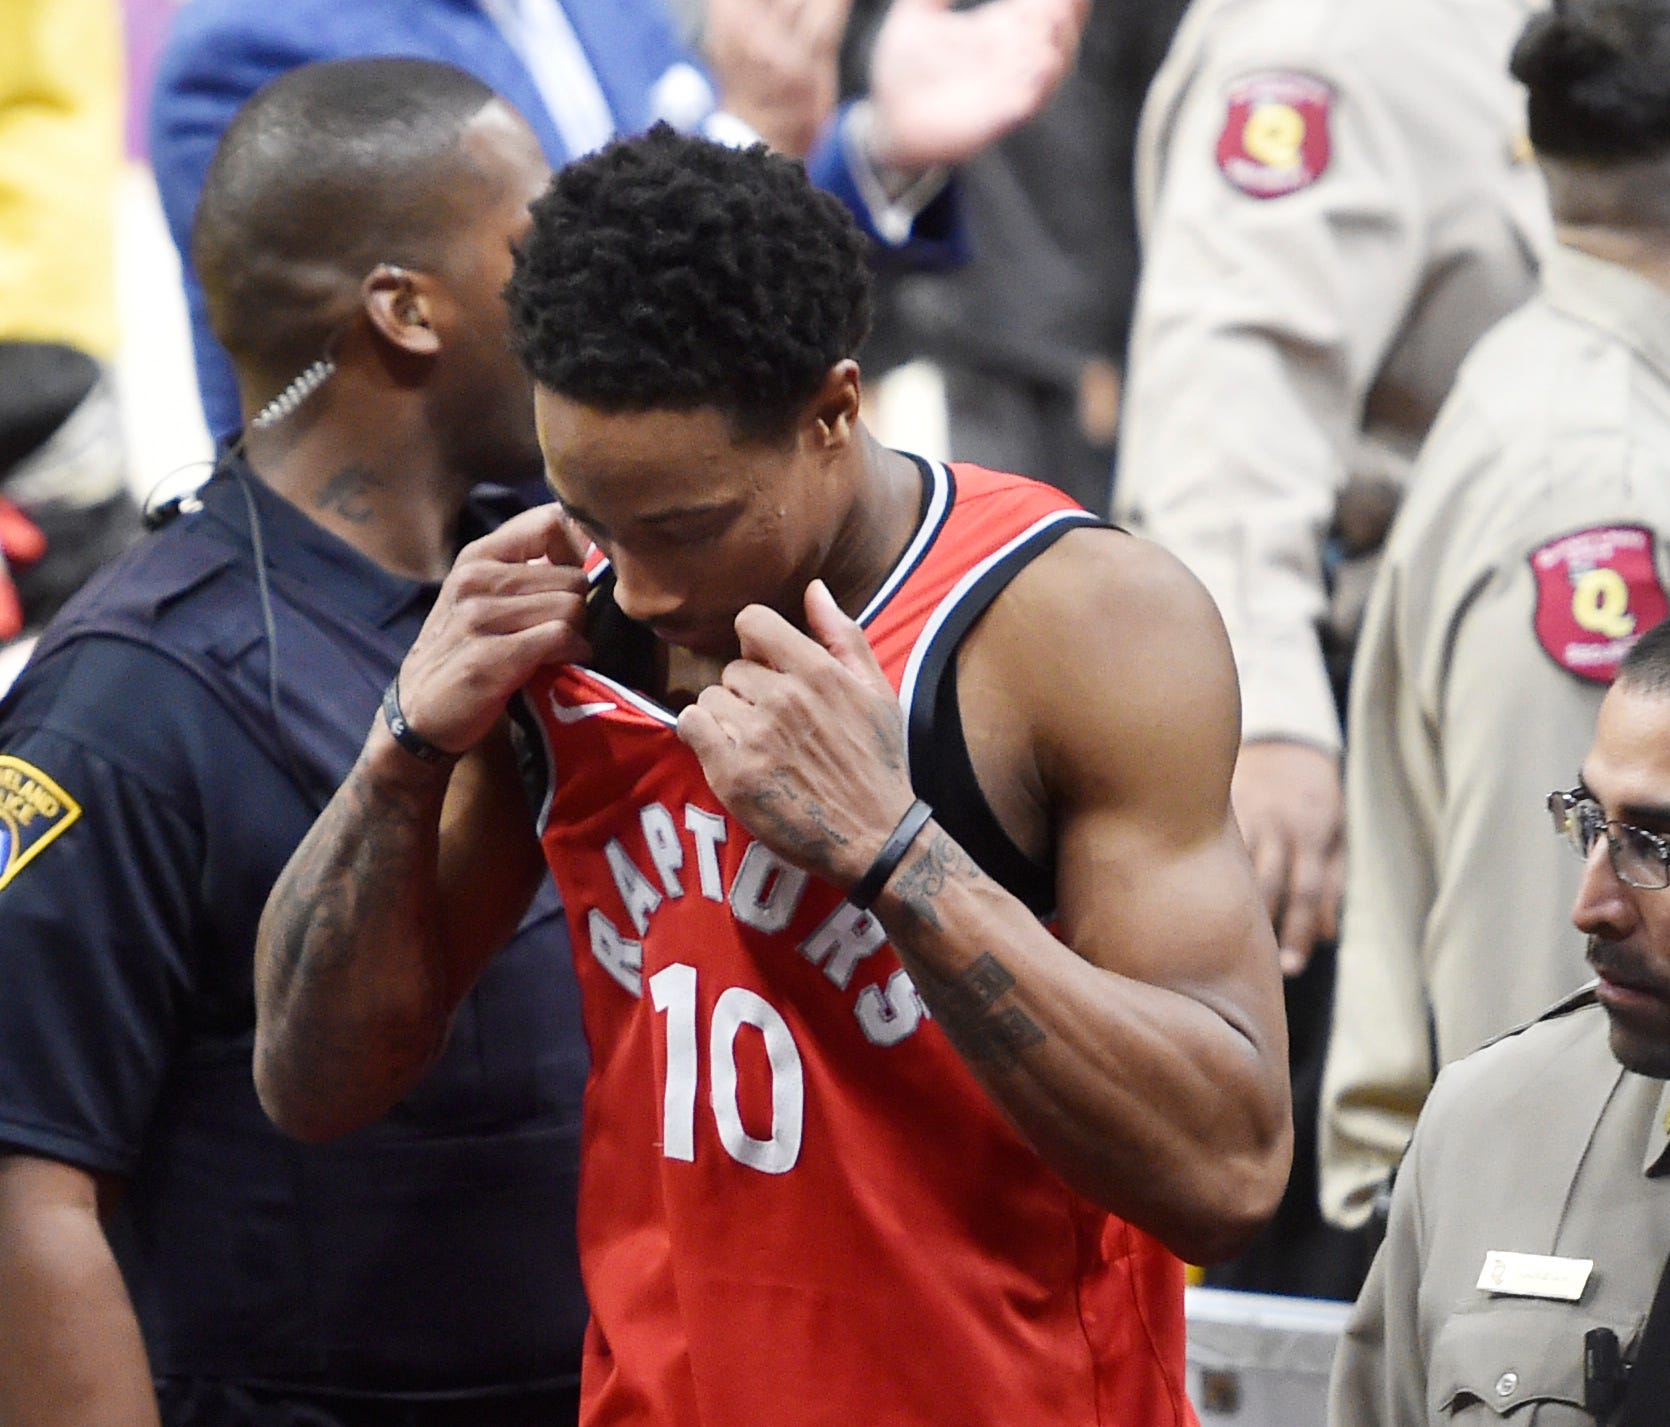 Toronto Raptors guard DeMar DeRozan (10) walks off the court after being ejected for a flagrant foul in the third quarter against the Cleveland Cavaliers in game four of the second round of the 2018 NBA Playoffs at Quicken Loans Arena.